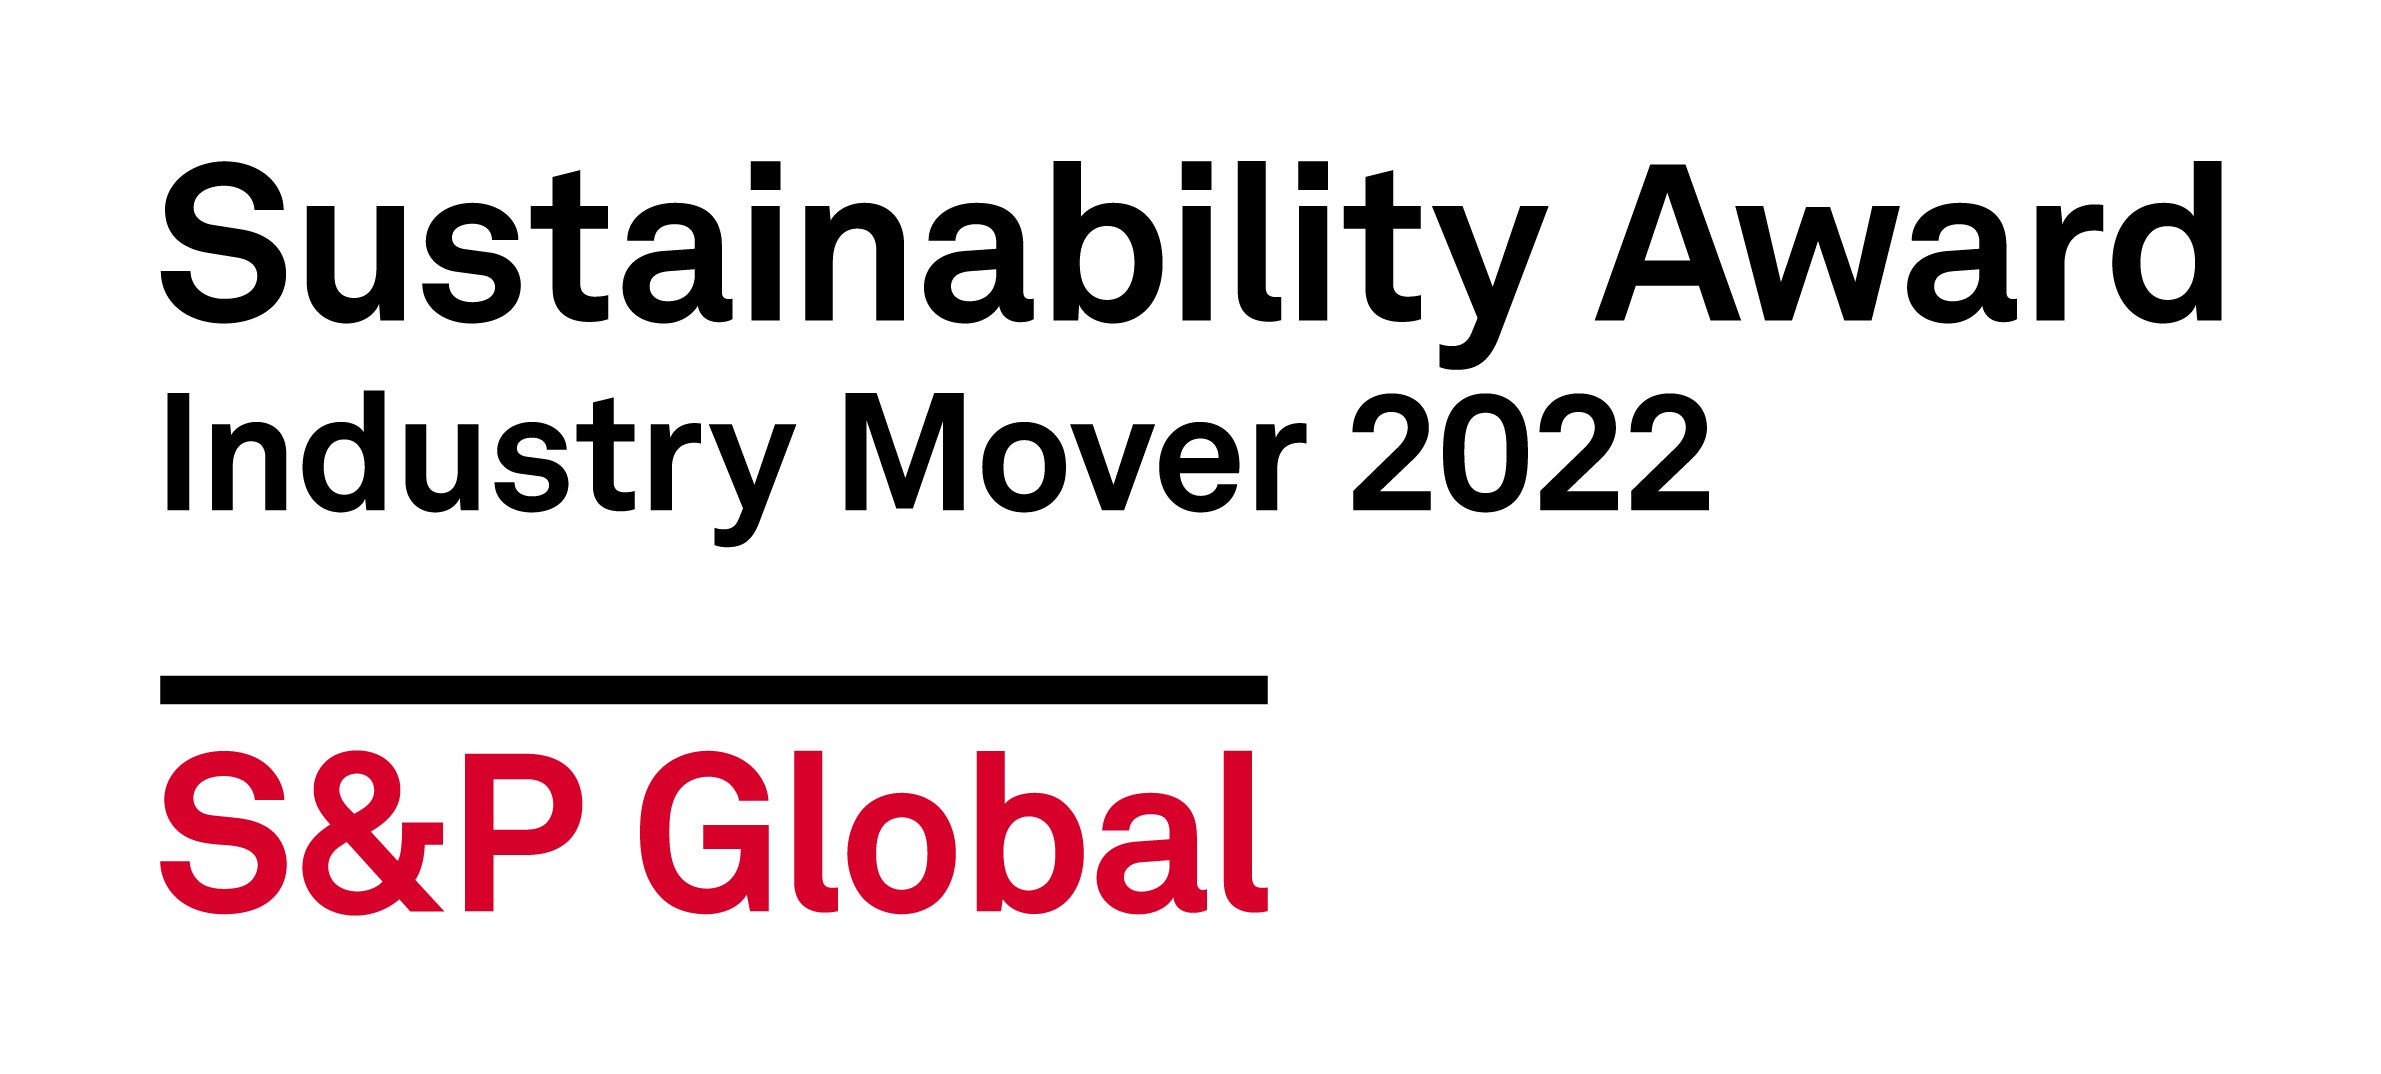 ingersoll-rand-awarded-by-sandp-global-as-world-leader-in-sustainability_part-1